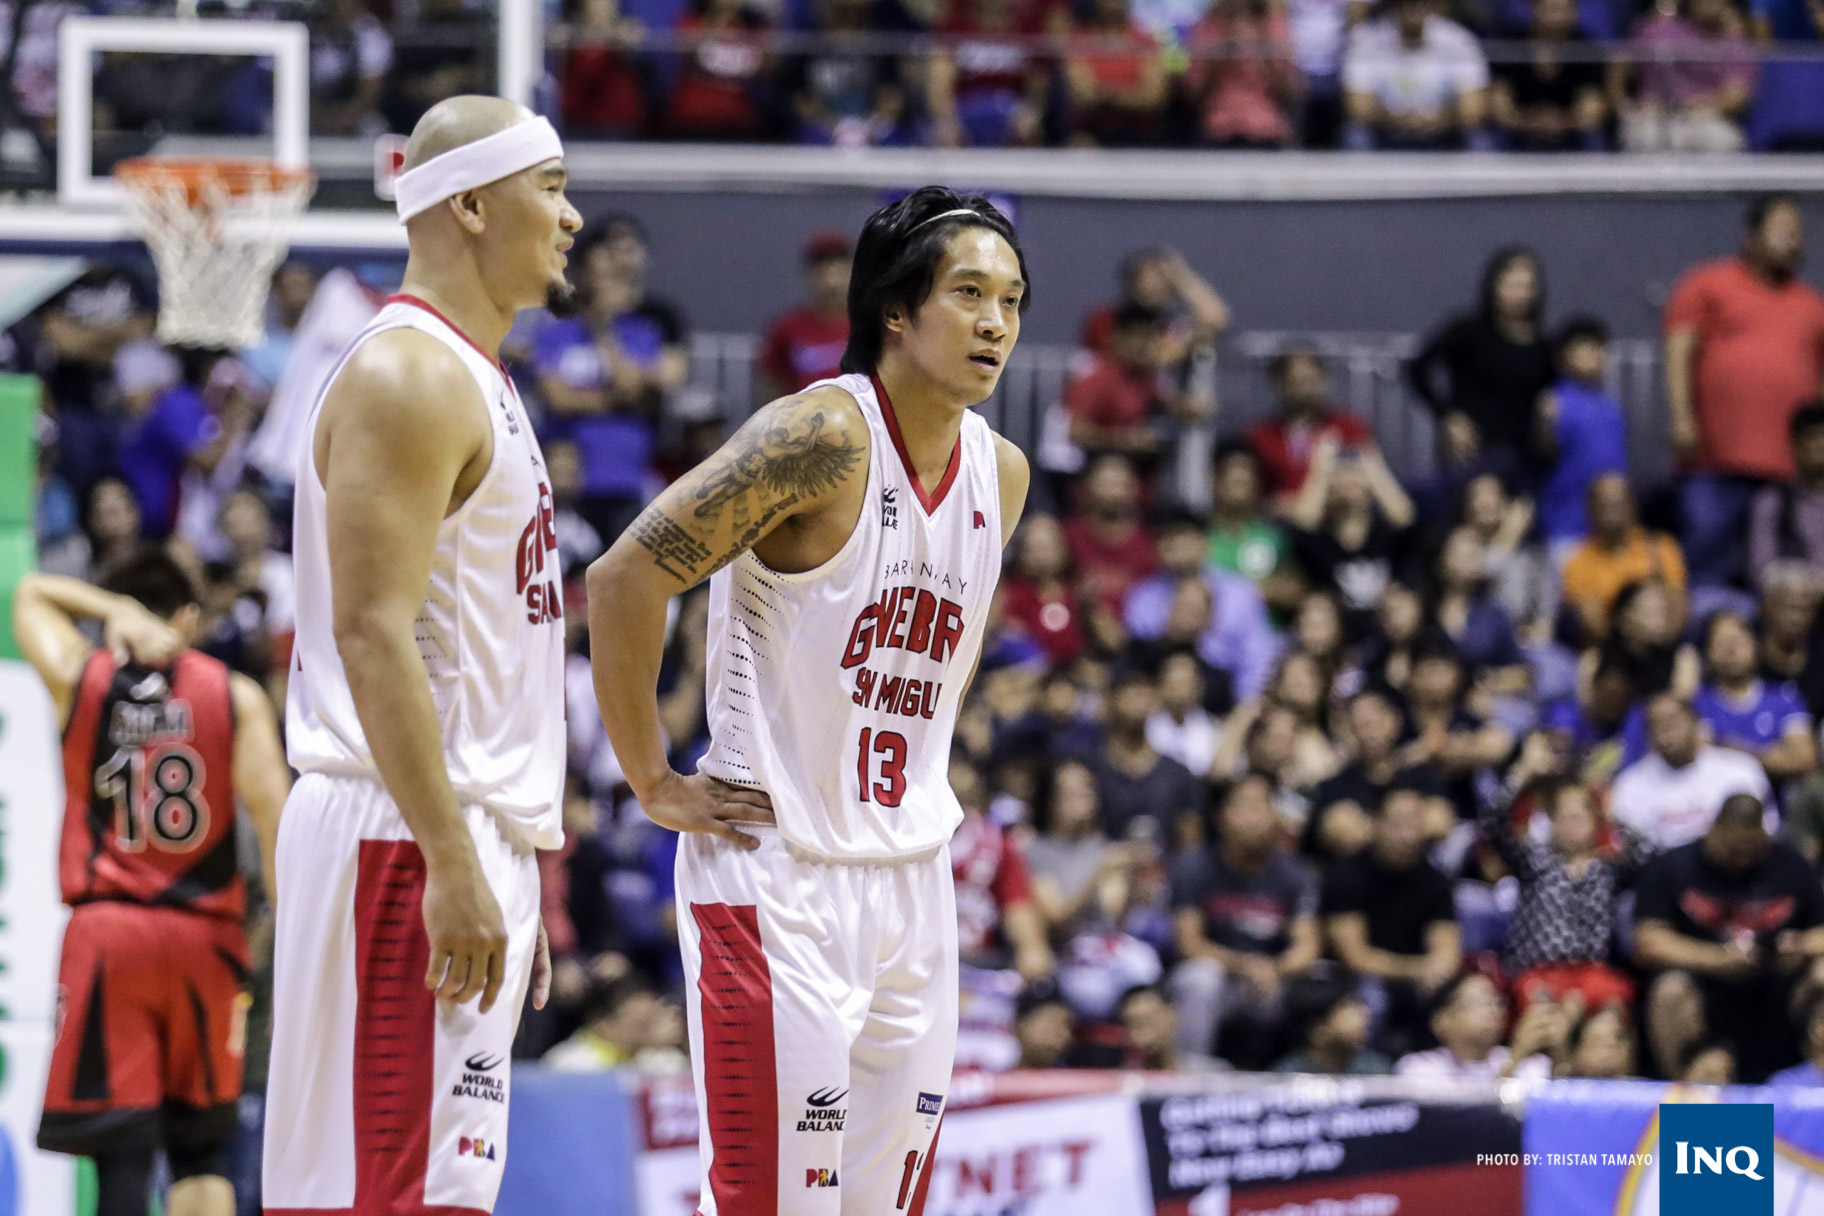 PBA Semifinals game between the Ginebra Gin Kings and San Miguel Beermen. Photo by Tristan Tamayo/INQUIRER.net